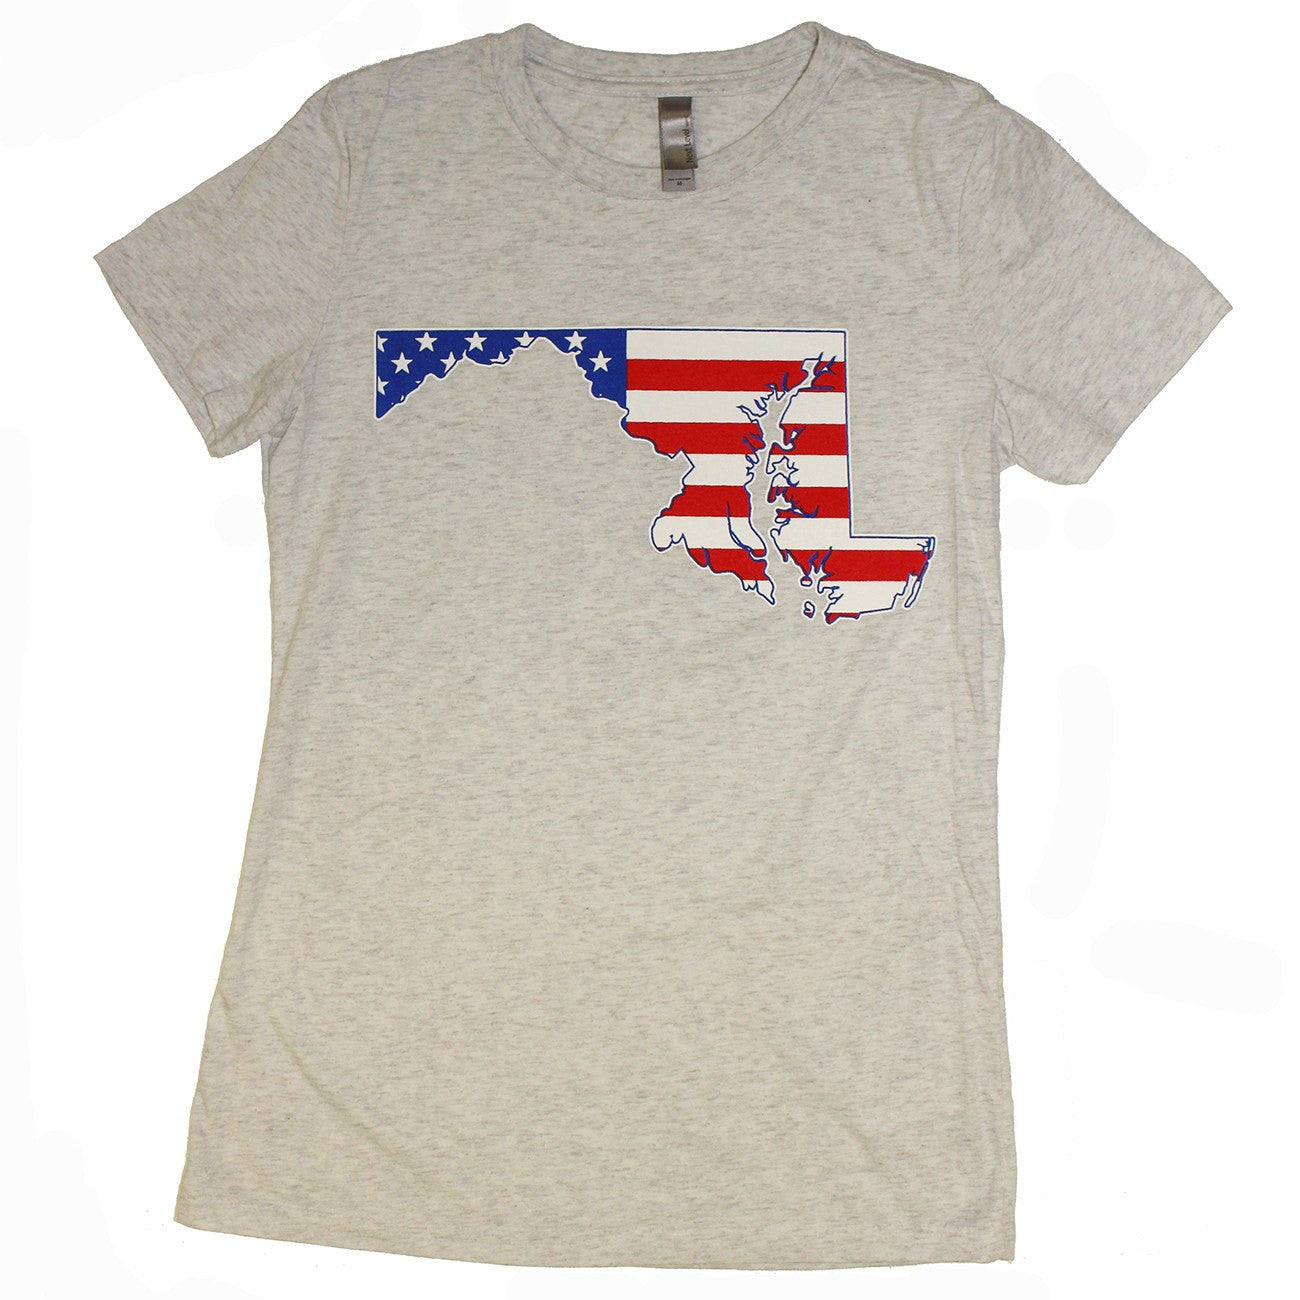 American State of Maryland (Heather Grey) / Ladies Shirt - Route One Apparel